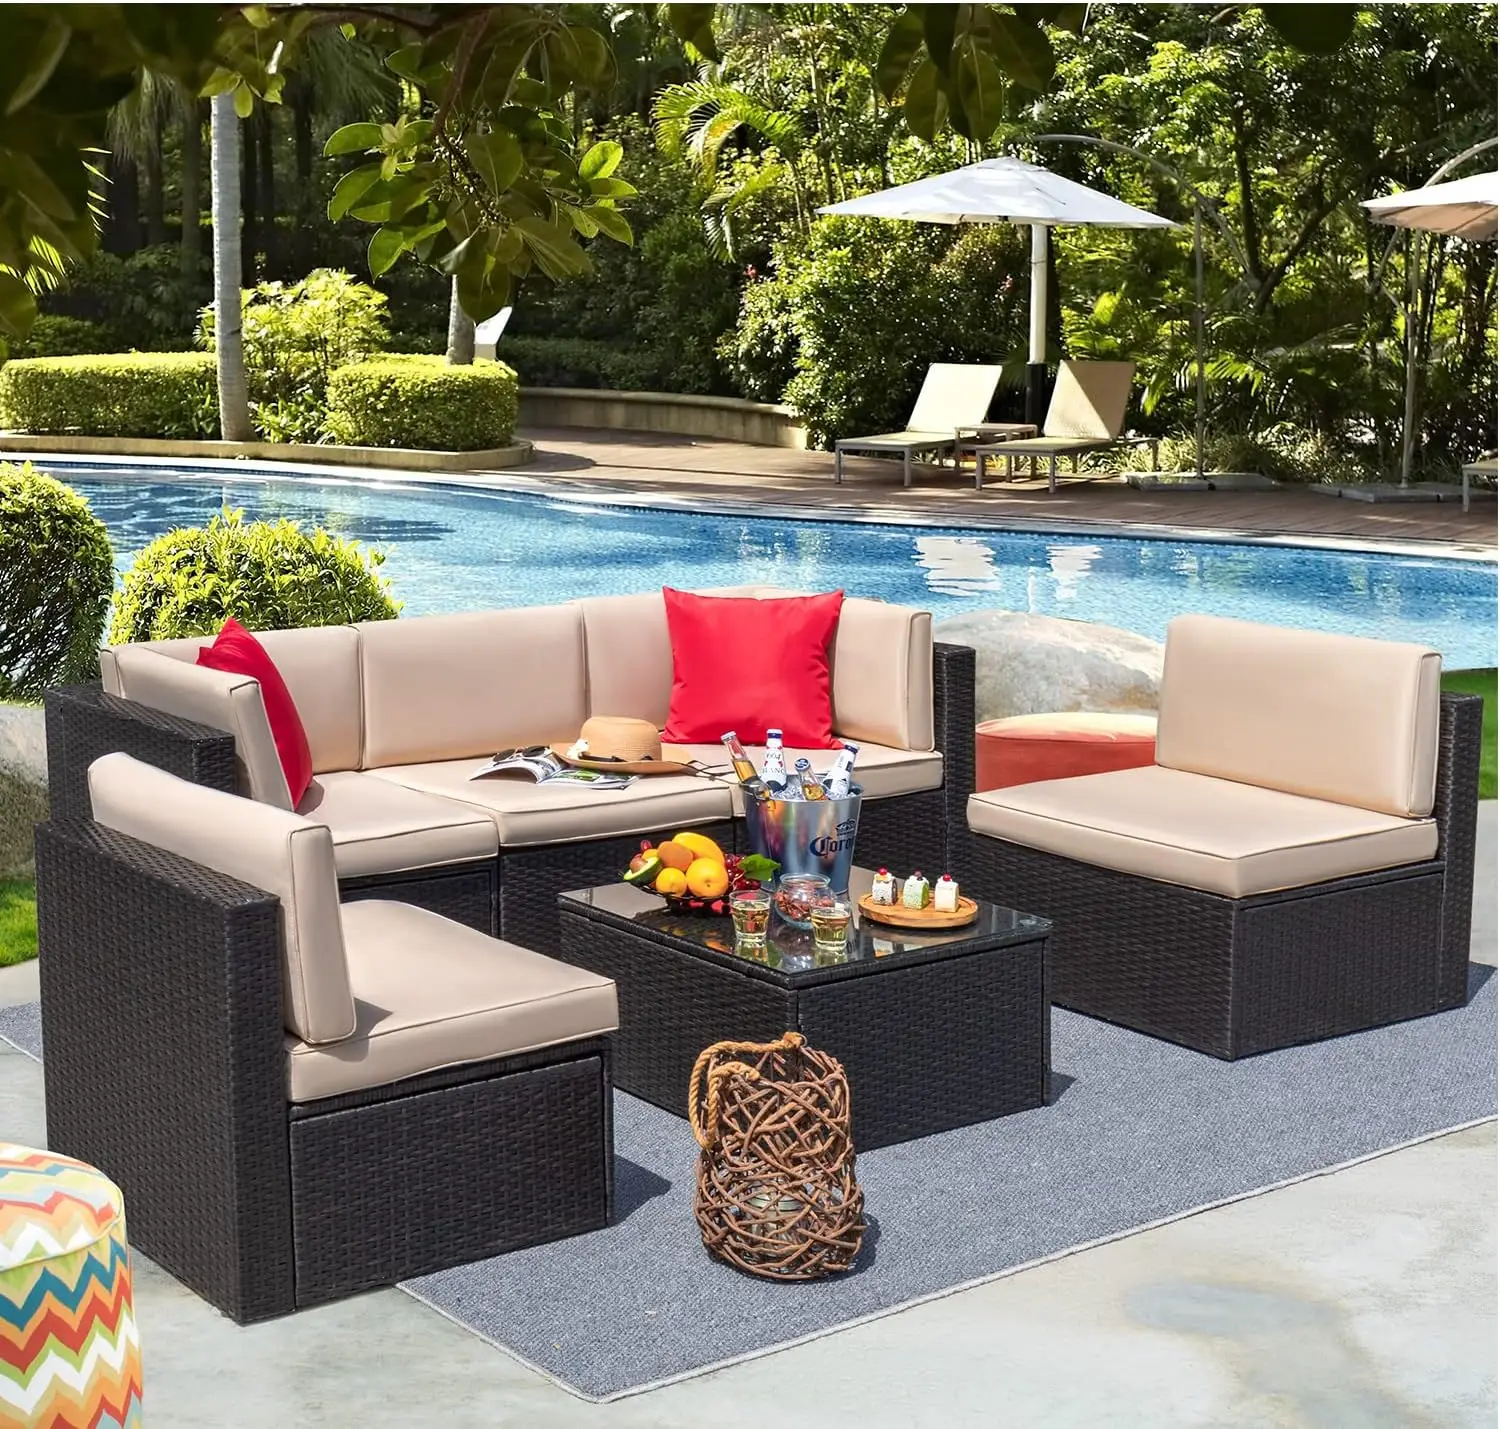 

Patio Furniture Sets 6 Pieces Outdoor Sectional Rattan Sofa Manual Weaving Wicker Patio Conversation Set with Glass Table